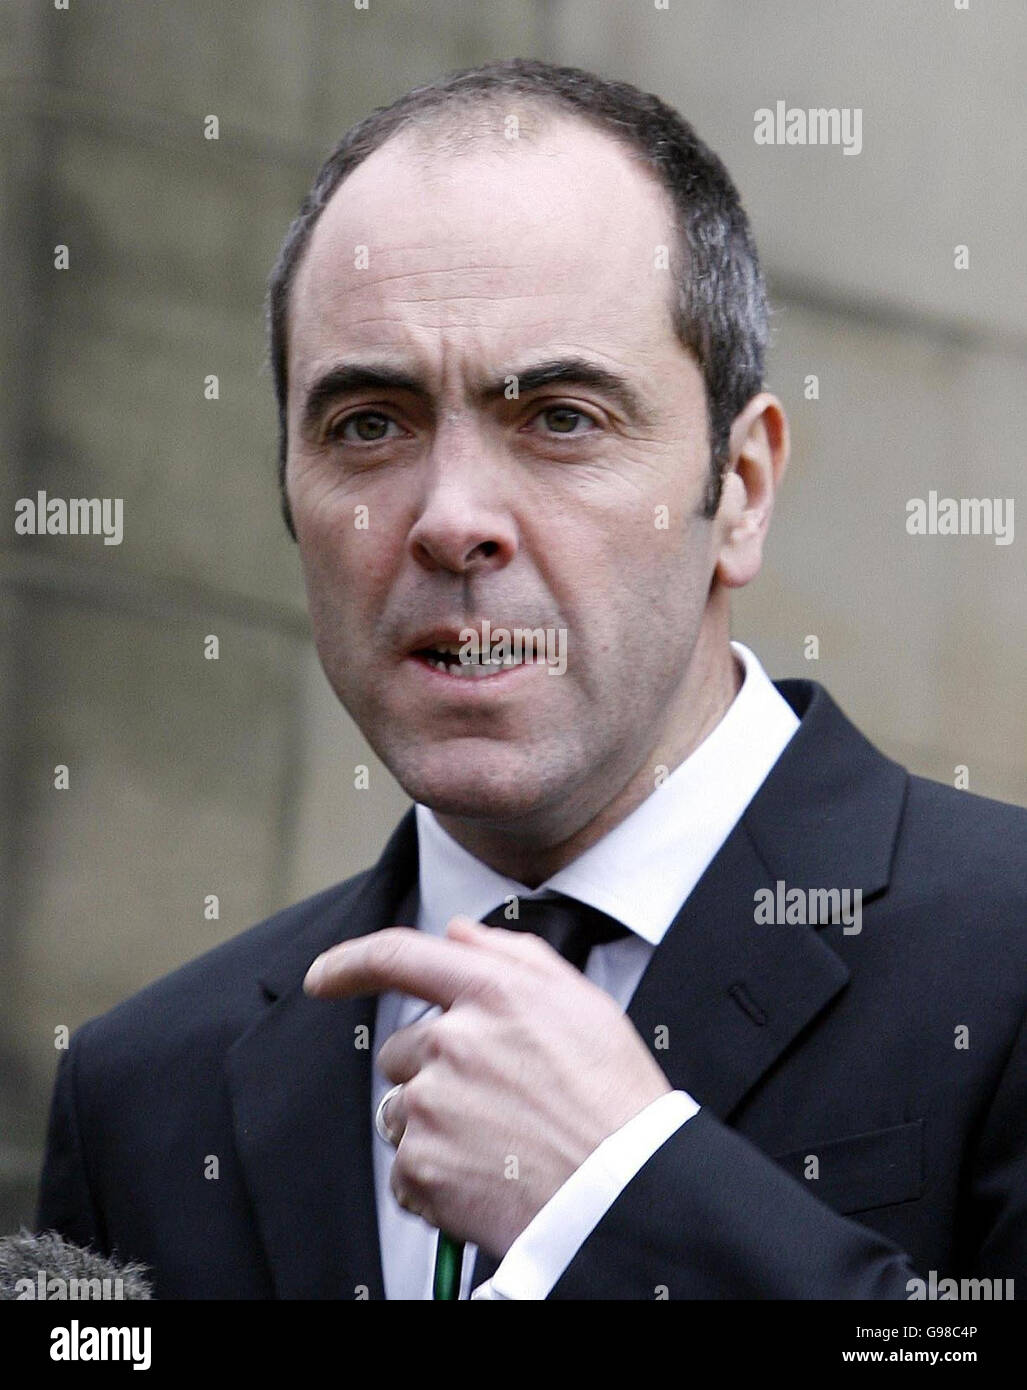 James Nesbitt at the memorial service for football legend George Best, at Manchester Cathedral, Thursday March 16, 2006. Former Manchester United and Northern Ireland great Best succumbed to multiple organ failure on November 25 last year at the Cromwell Hospital in west London, following years of alcohol abuse. See PA Story MEMORIAL Best. PRESS ASSOCIATION Photo. Photo credit should read: Peter Byrne/PA. Stock Photo